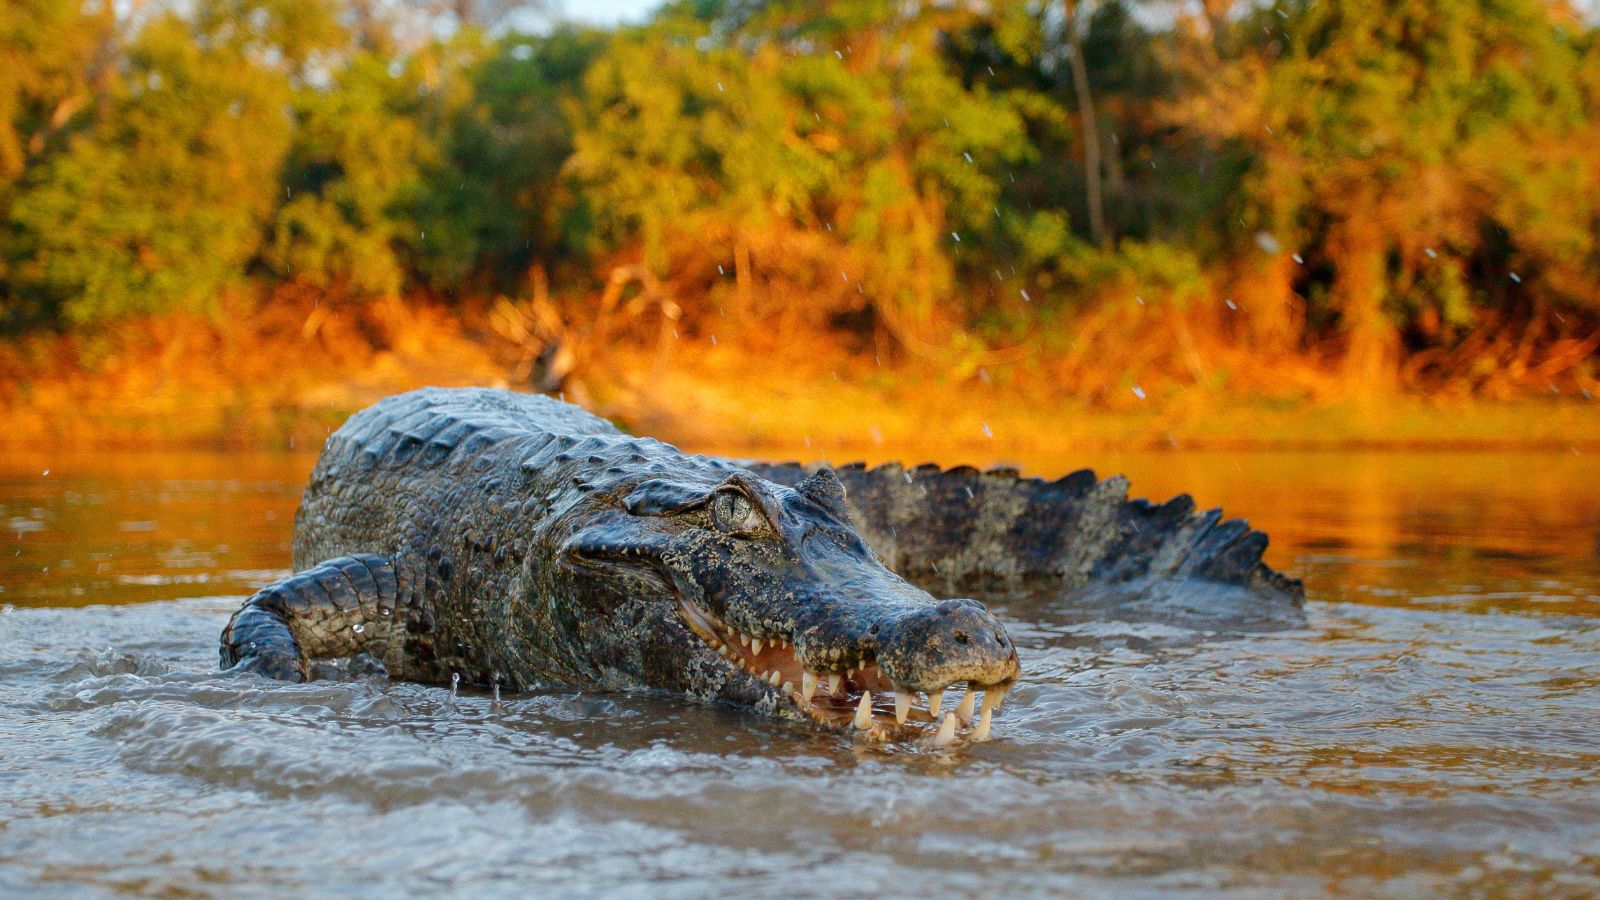 <p>It will come as no surprise that crocodilians, including crocodiles, alligators, and caimans, cannot be kept as pets in the U.S. These powerful creatures can be incredibly dangerous and have caused the deaths of<a href="https://a-z-animals.com/blog/crocodile-attacks-how-common-are-they/"> thousands of humans</a>.</p>